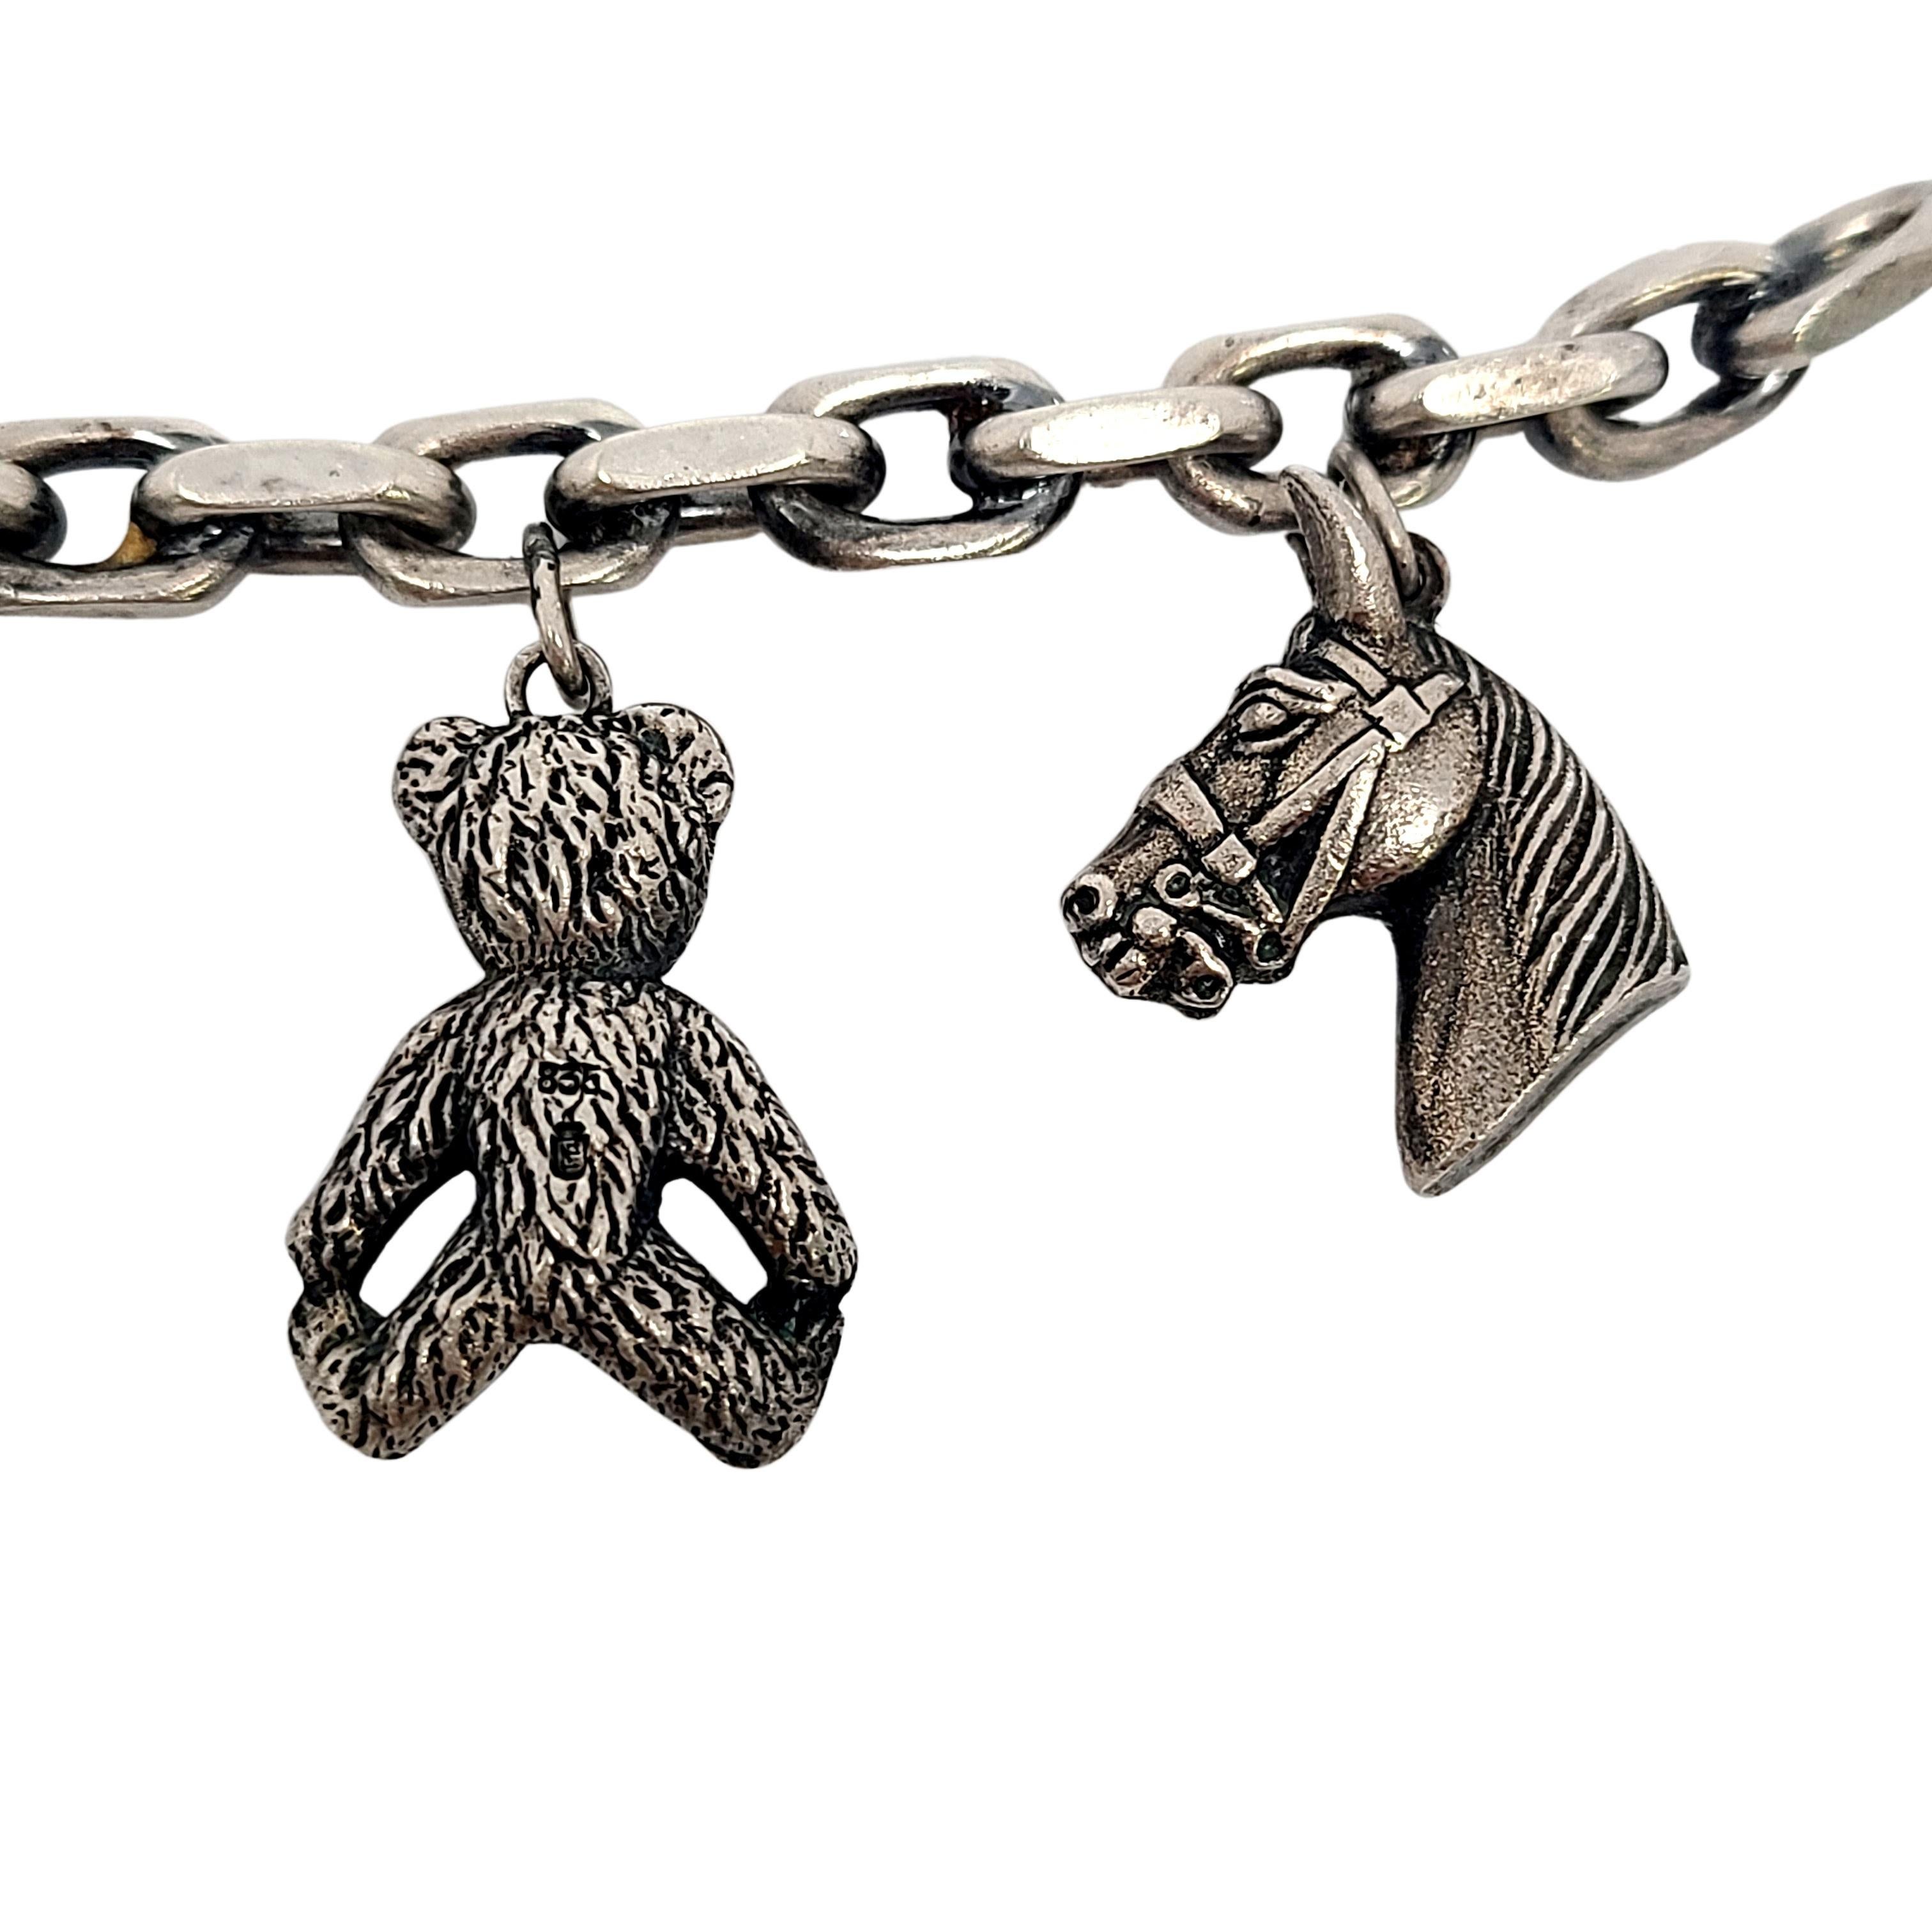 800 Silver Animal Charm Bracelet #11021 In Good Condition For Sale In Washington Depot, CT